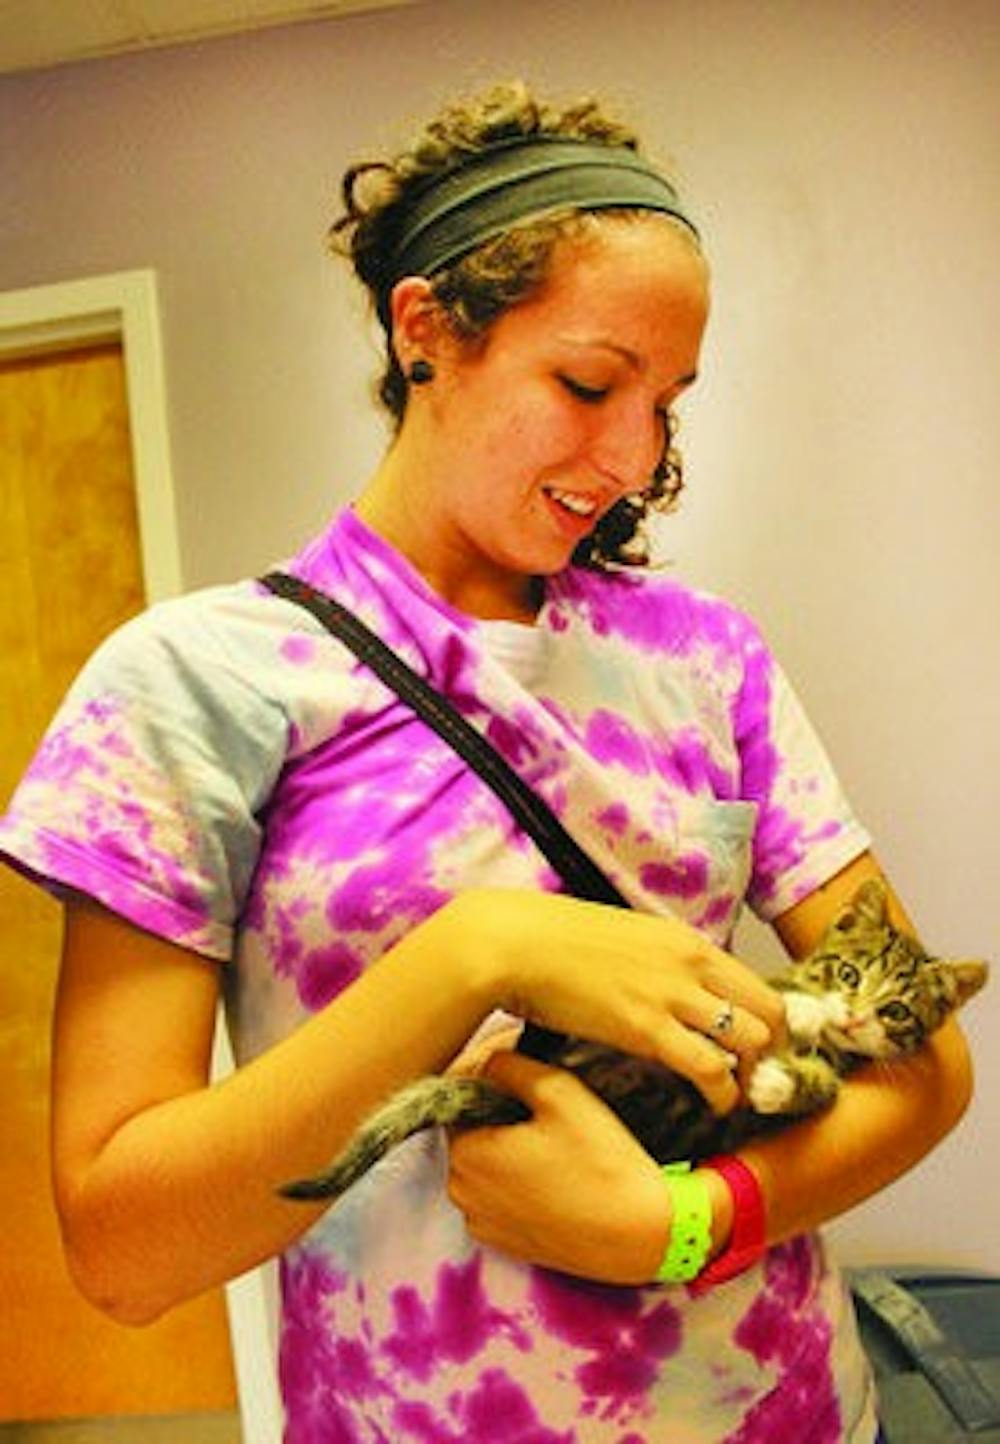 Sophomore Sarah Allen cradles a kitten at the LCHS. Cat adoptions are free and kitten adoptions are discounted through the end of November. (Alex Sager / ASSOCIATE PHOTO EDITOR)